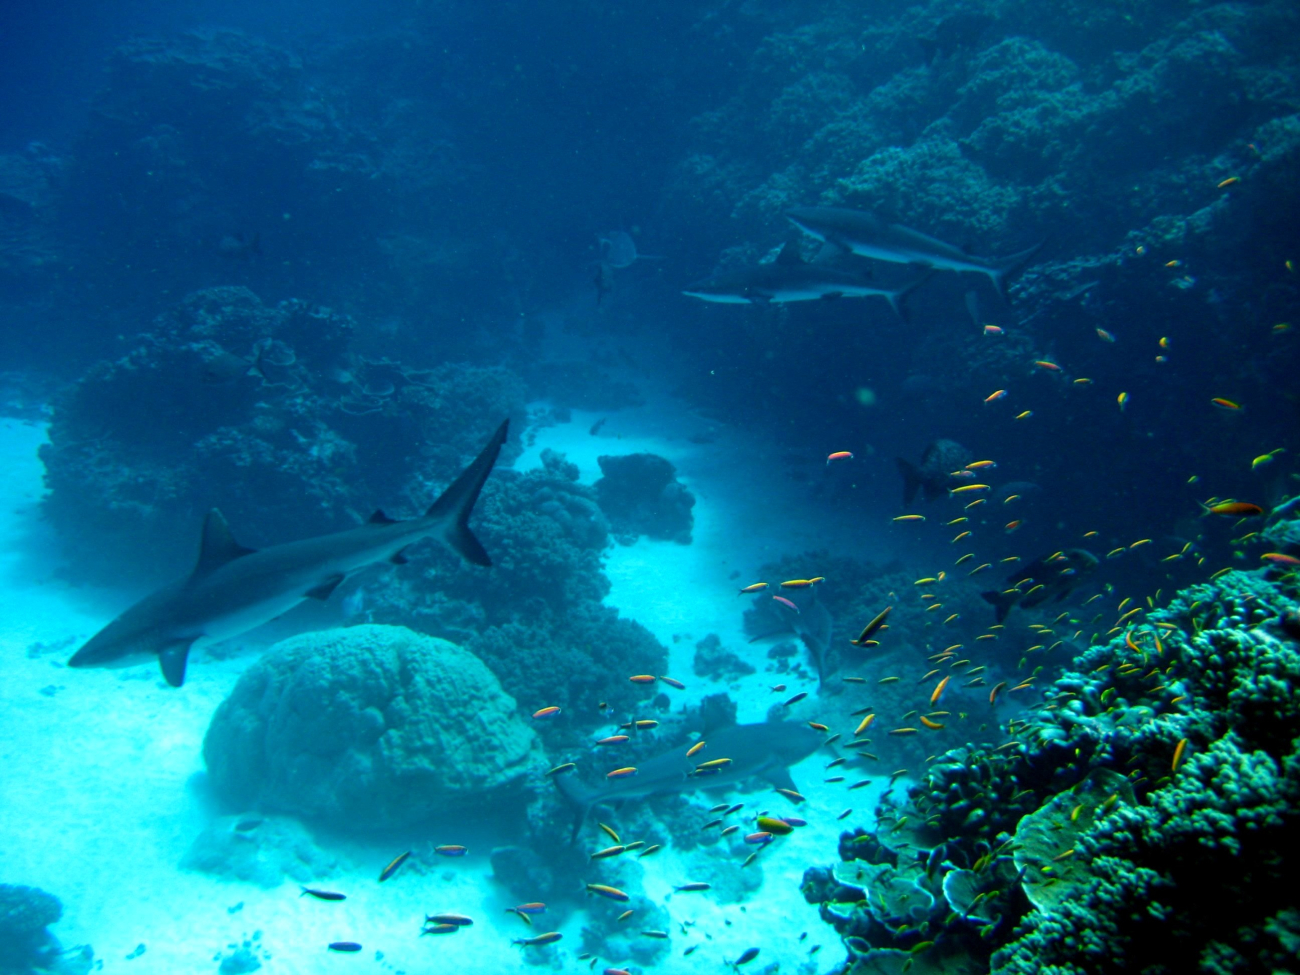 Silvertip shark(Carcharhinus albimarginatus) and gray reef sharks over the reef with school of anthias